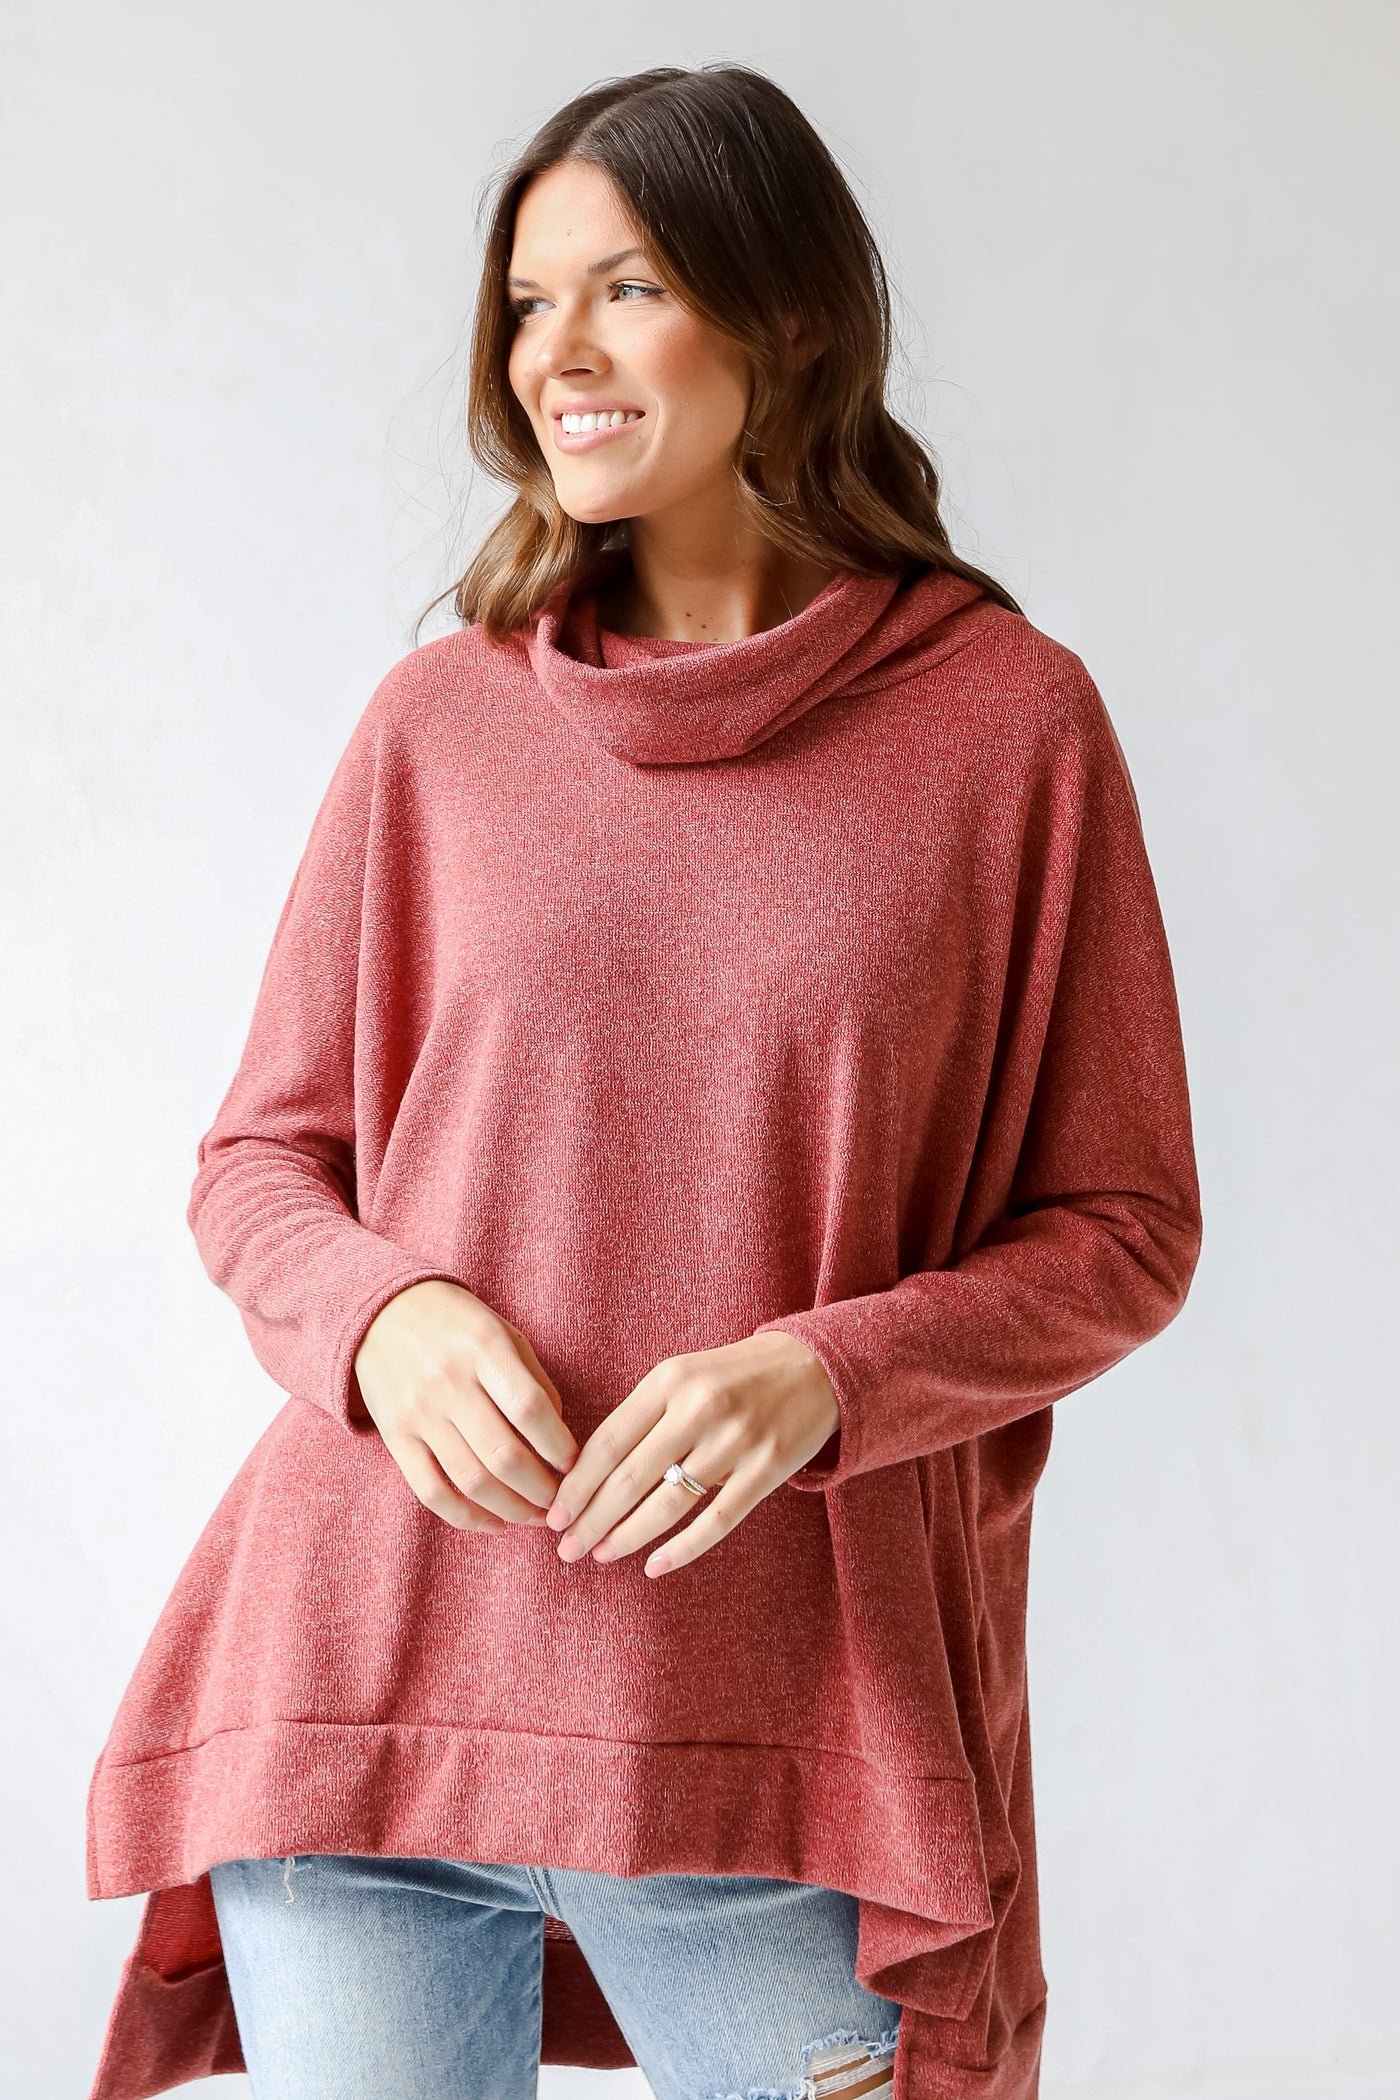 Cowl Neck Knit Top in rust